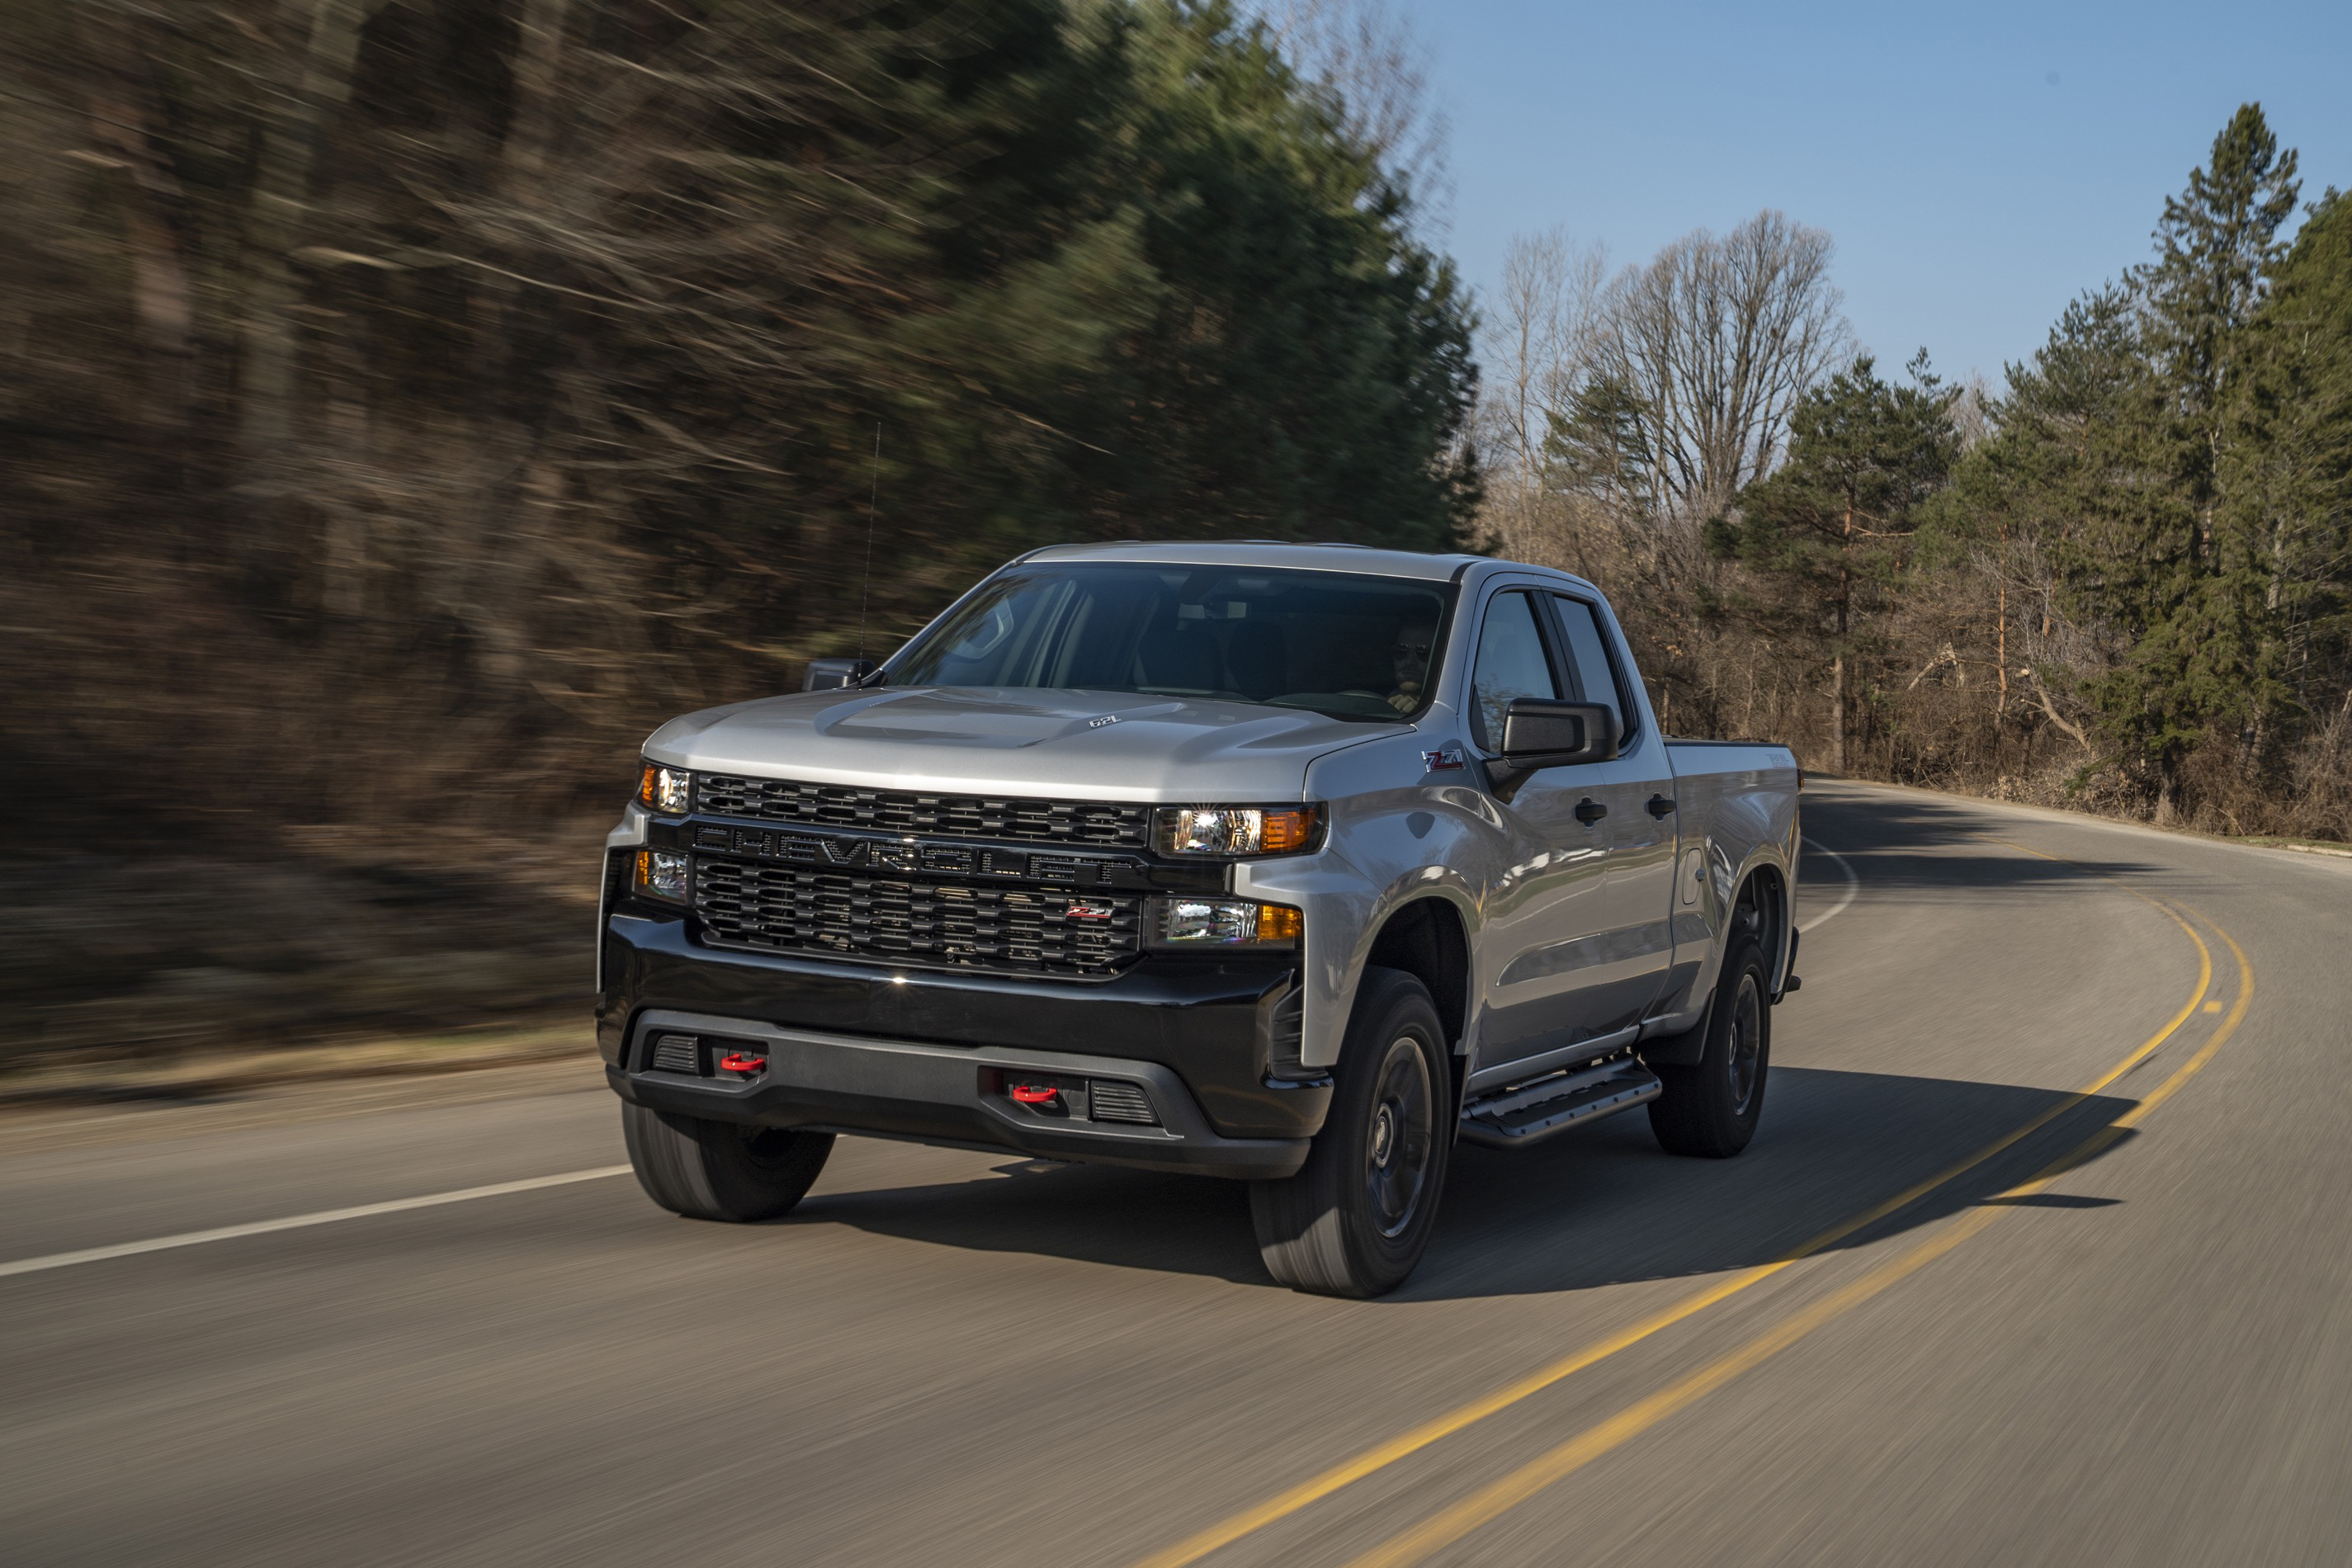 2020 Chevy Silverado 1500 cranks up the power & gets best-in-class